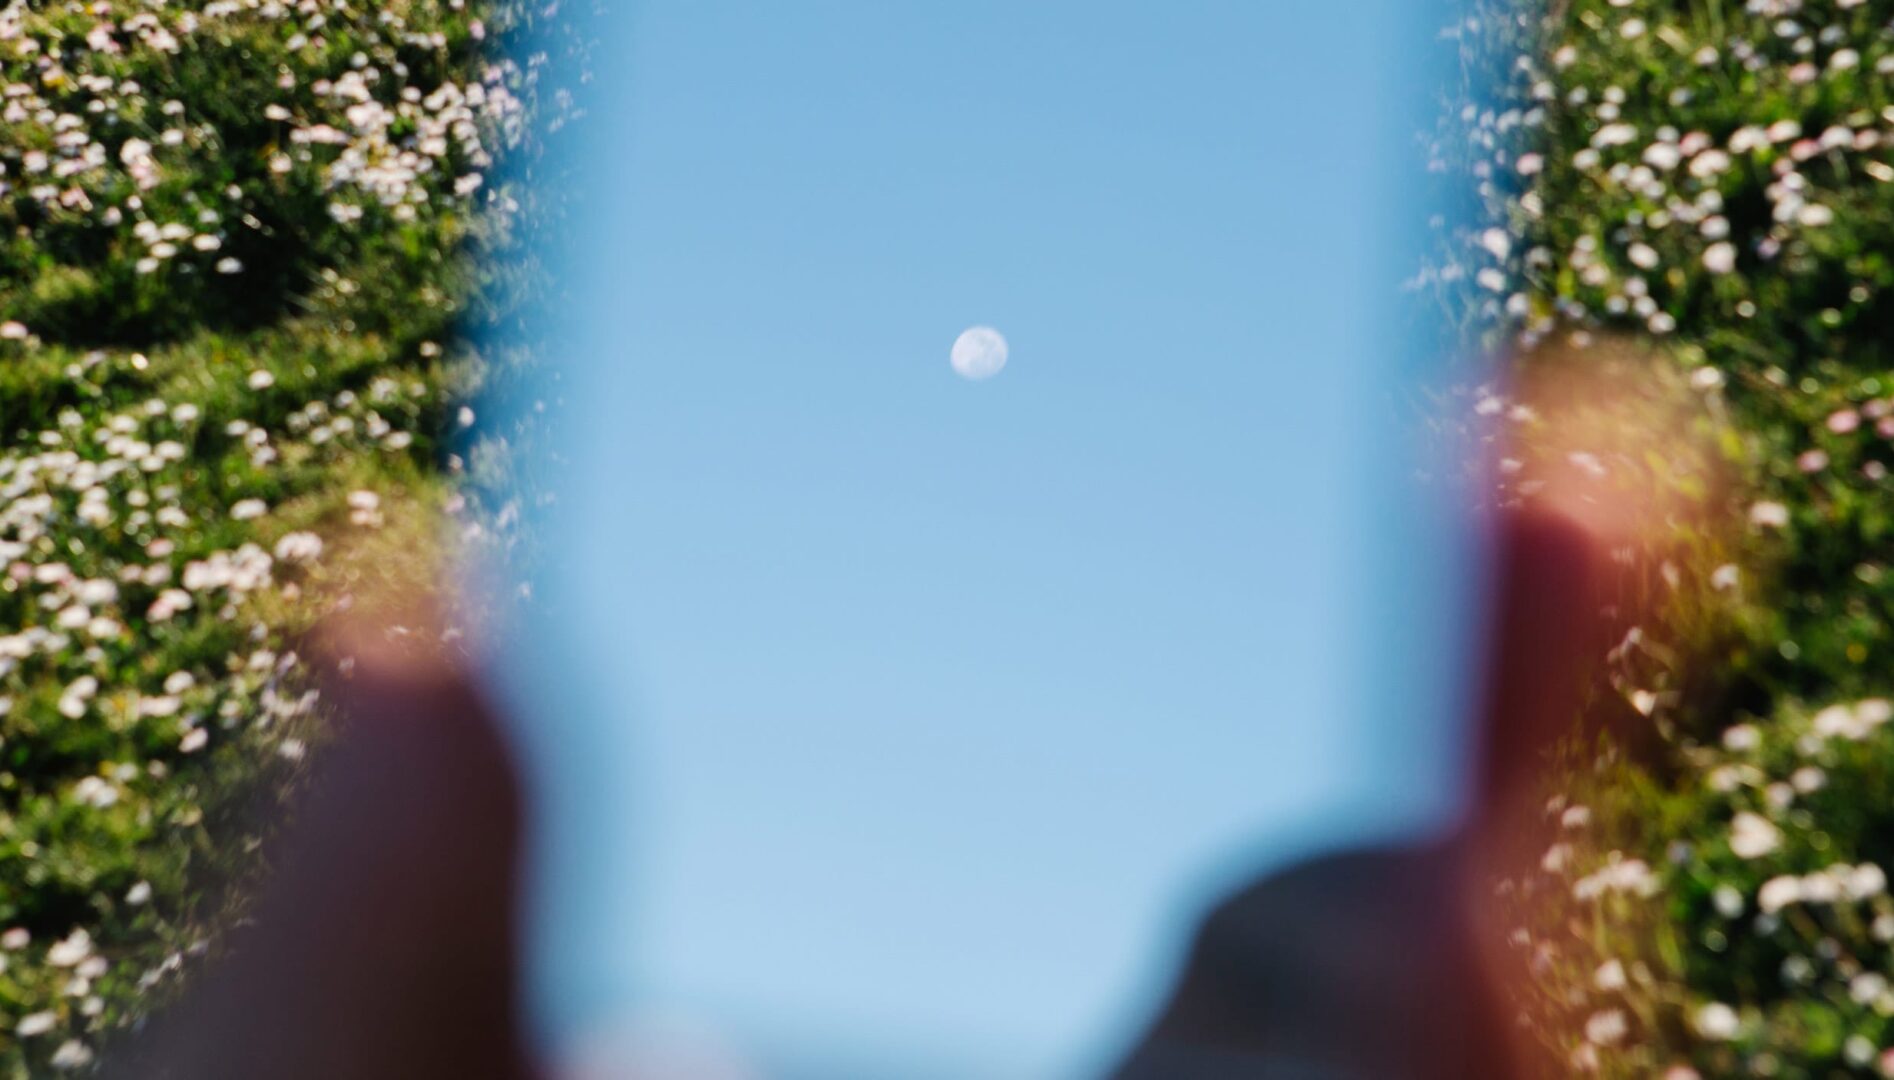 Reflection of the moon in a handheld mirror.